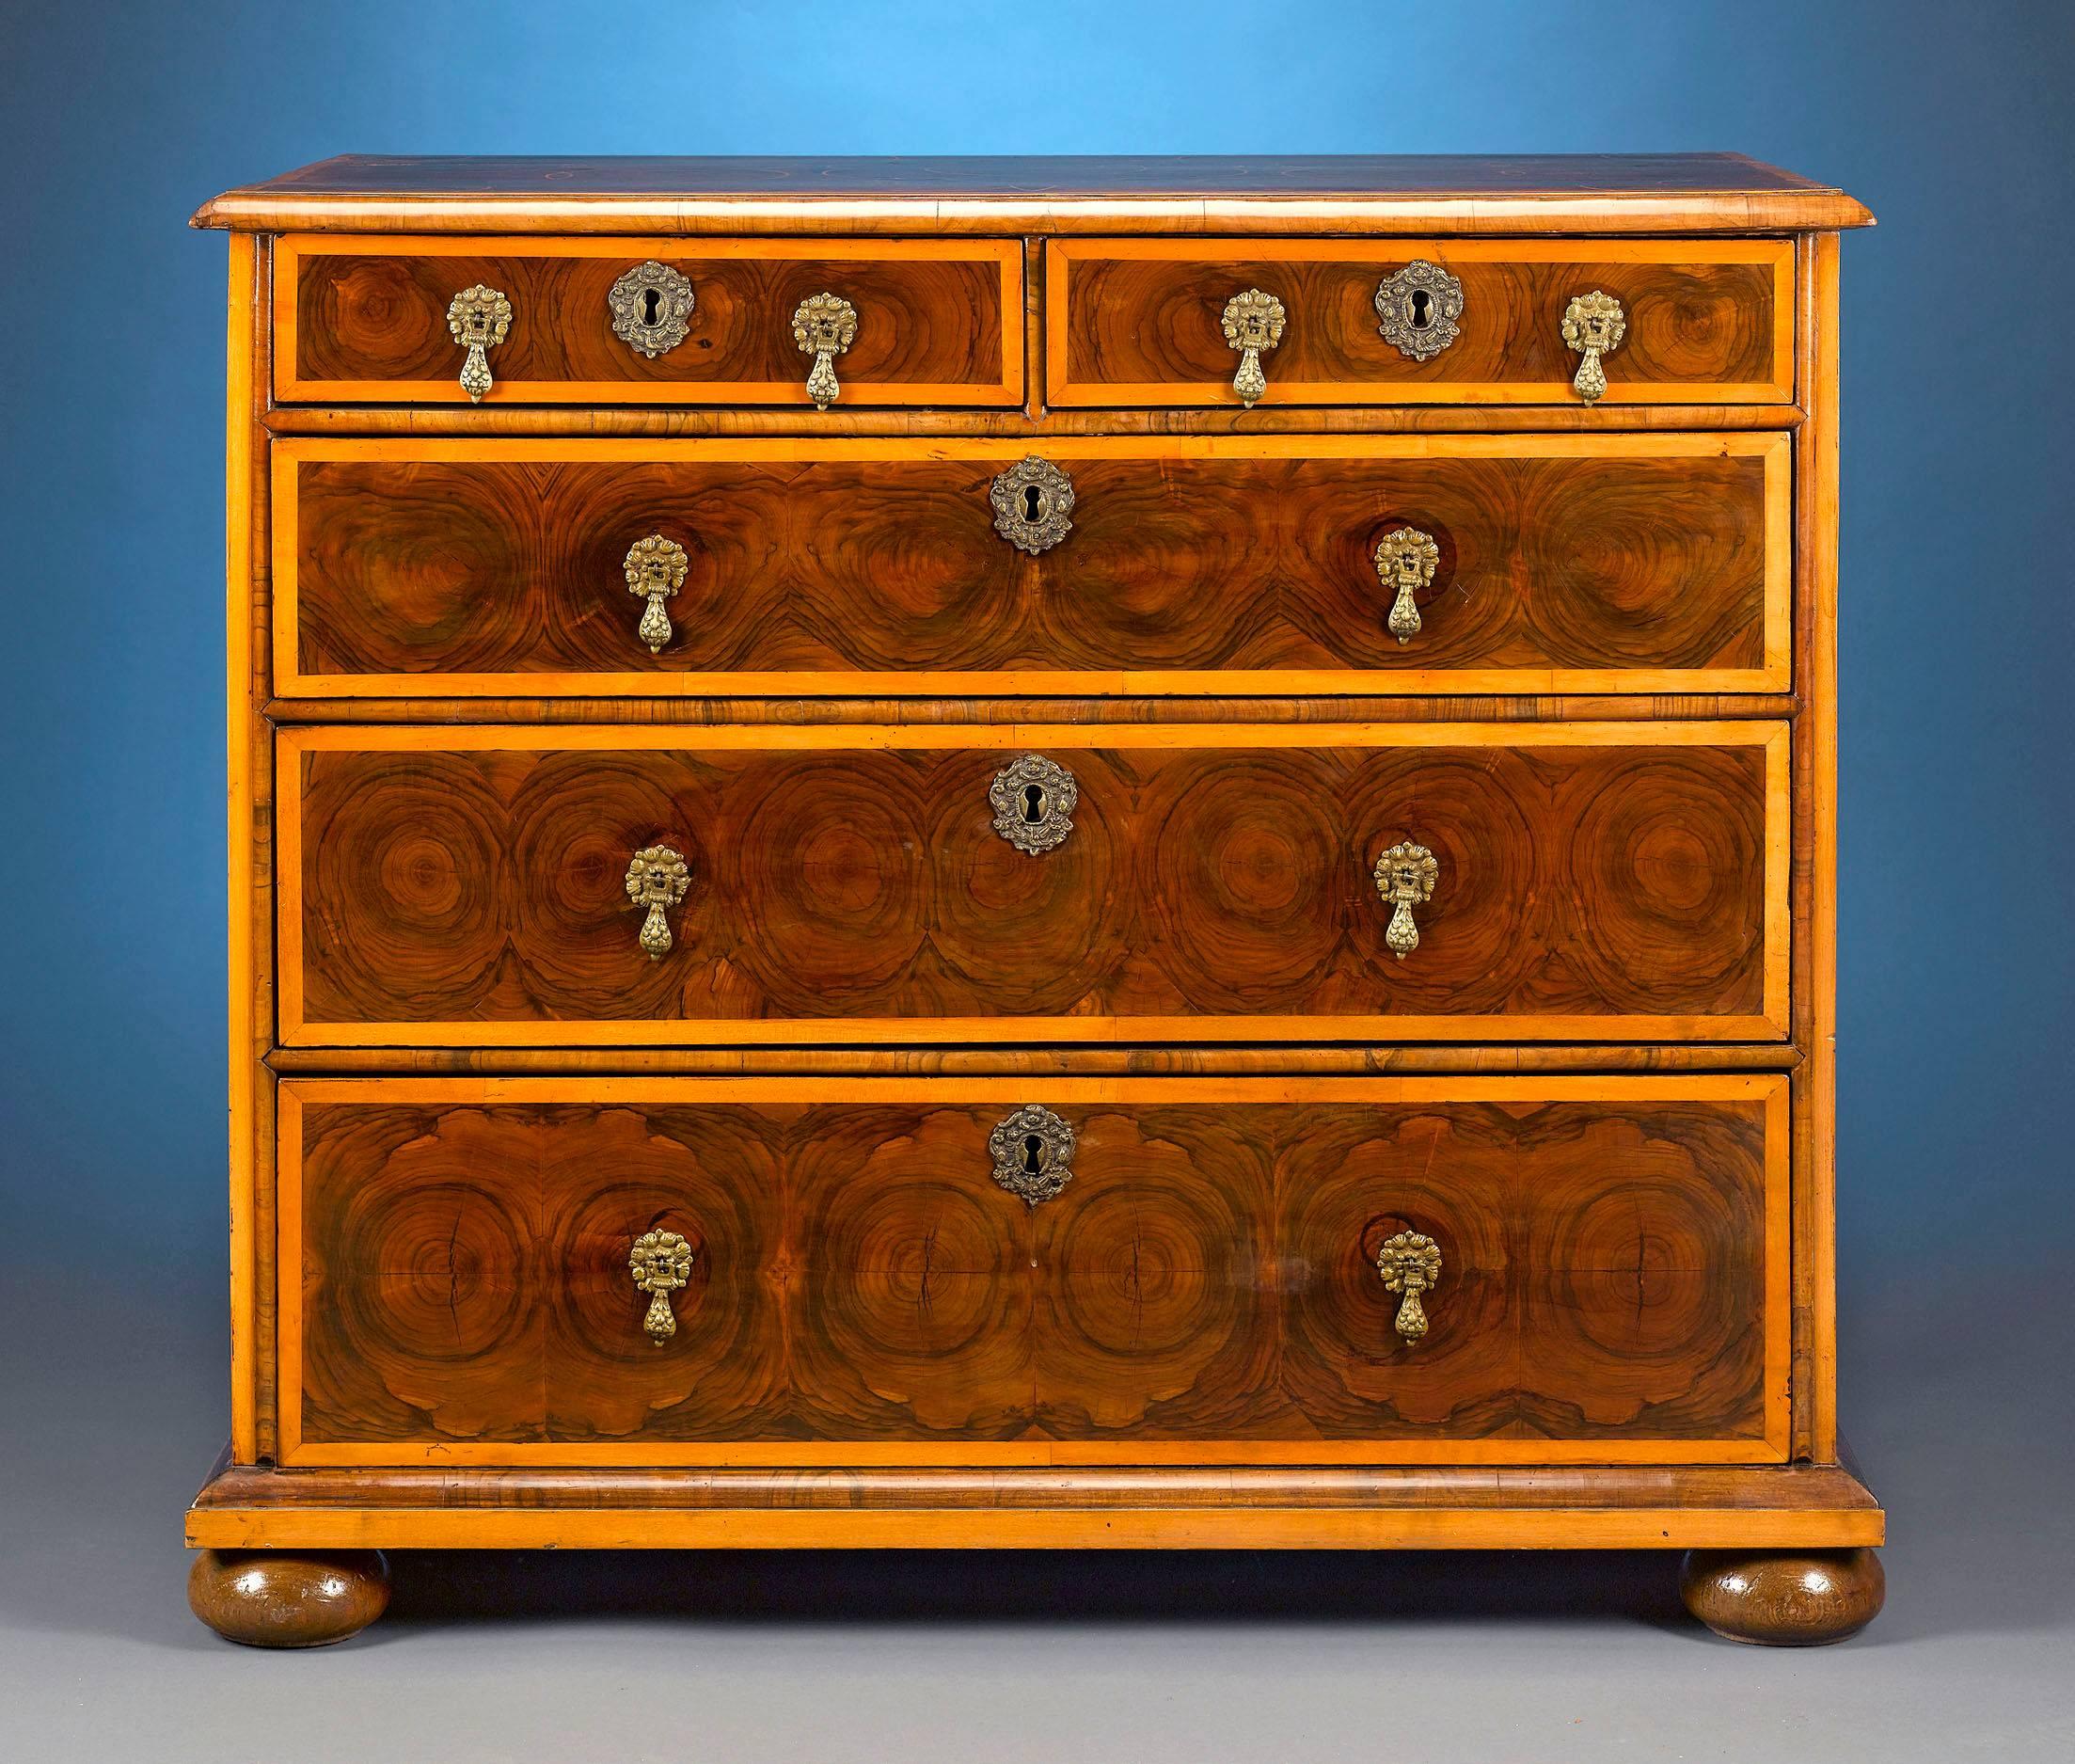 A magnificent William and Mary period chest, clearly distinguished by an expertly applied oysterwood veneer of fine English walnut. From its inlaid top of semi-circular patterns, to its intricate brass pulls and wonderfully curved bun feet, this